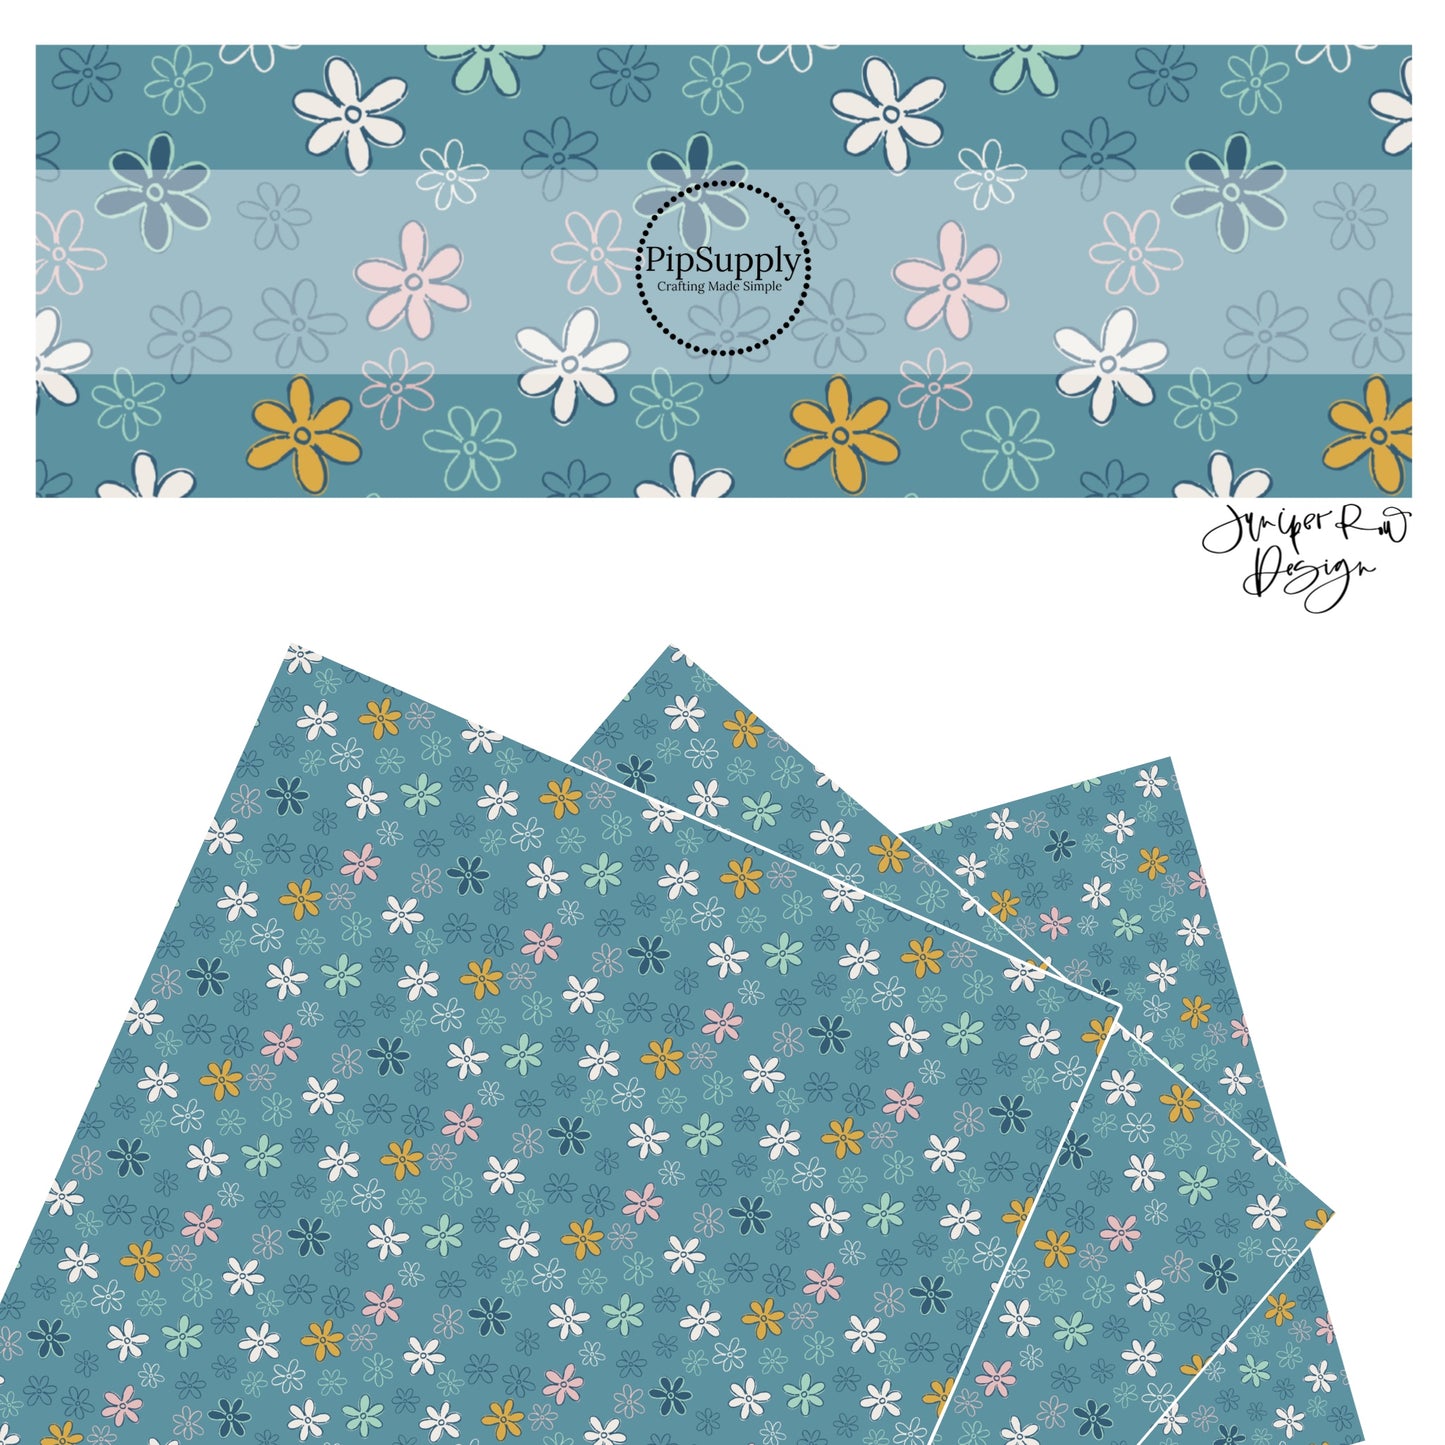 Yellow, pink, white, and blue drawn flowers on blue faux leather sheets